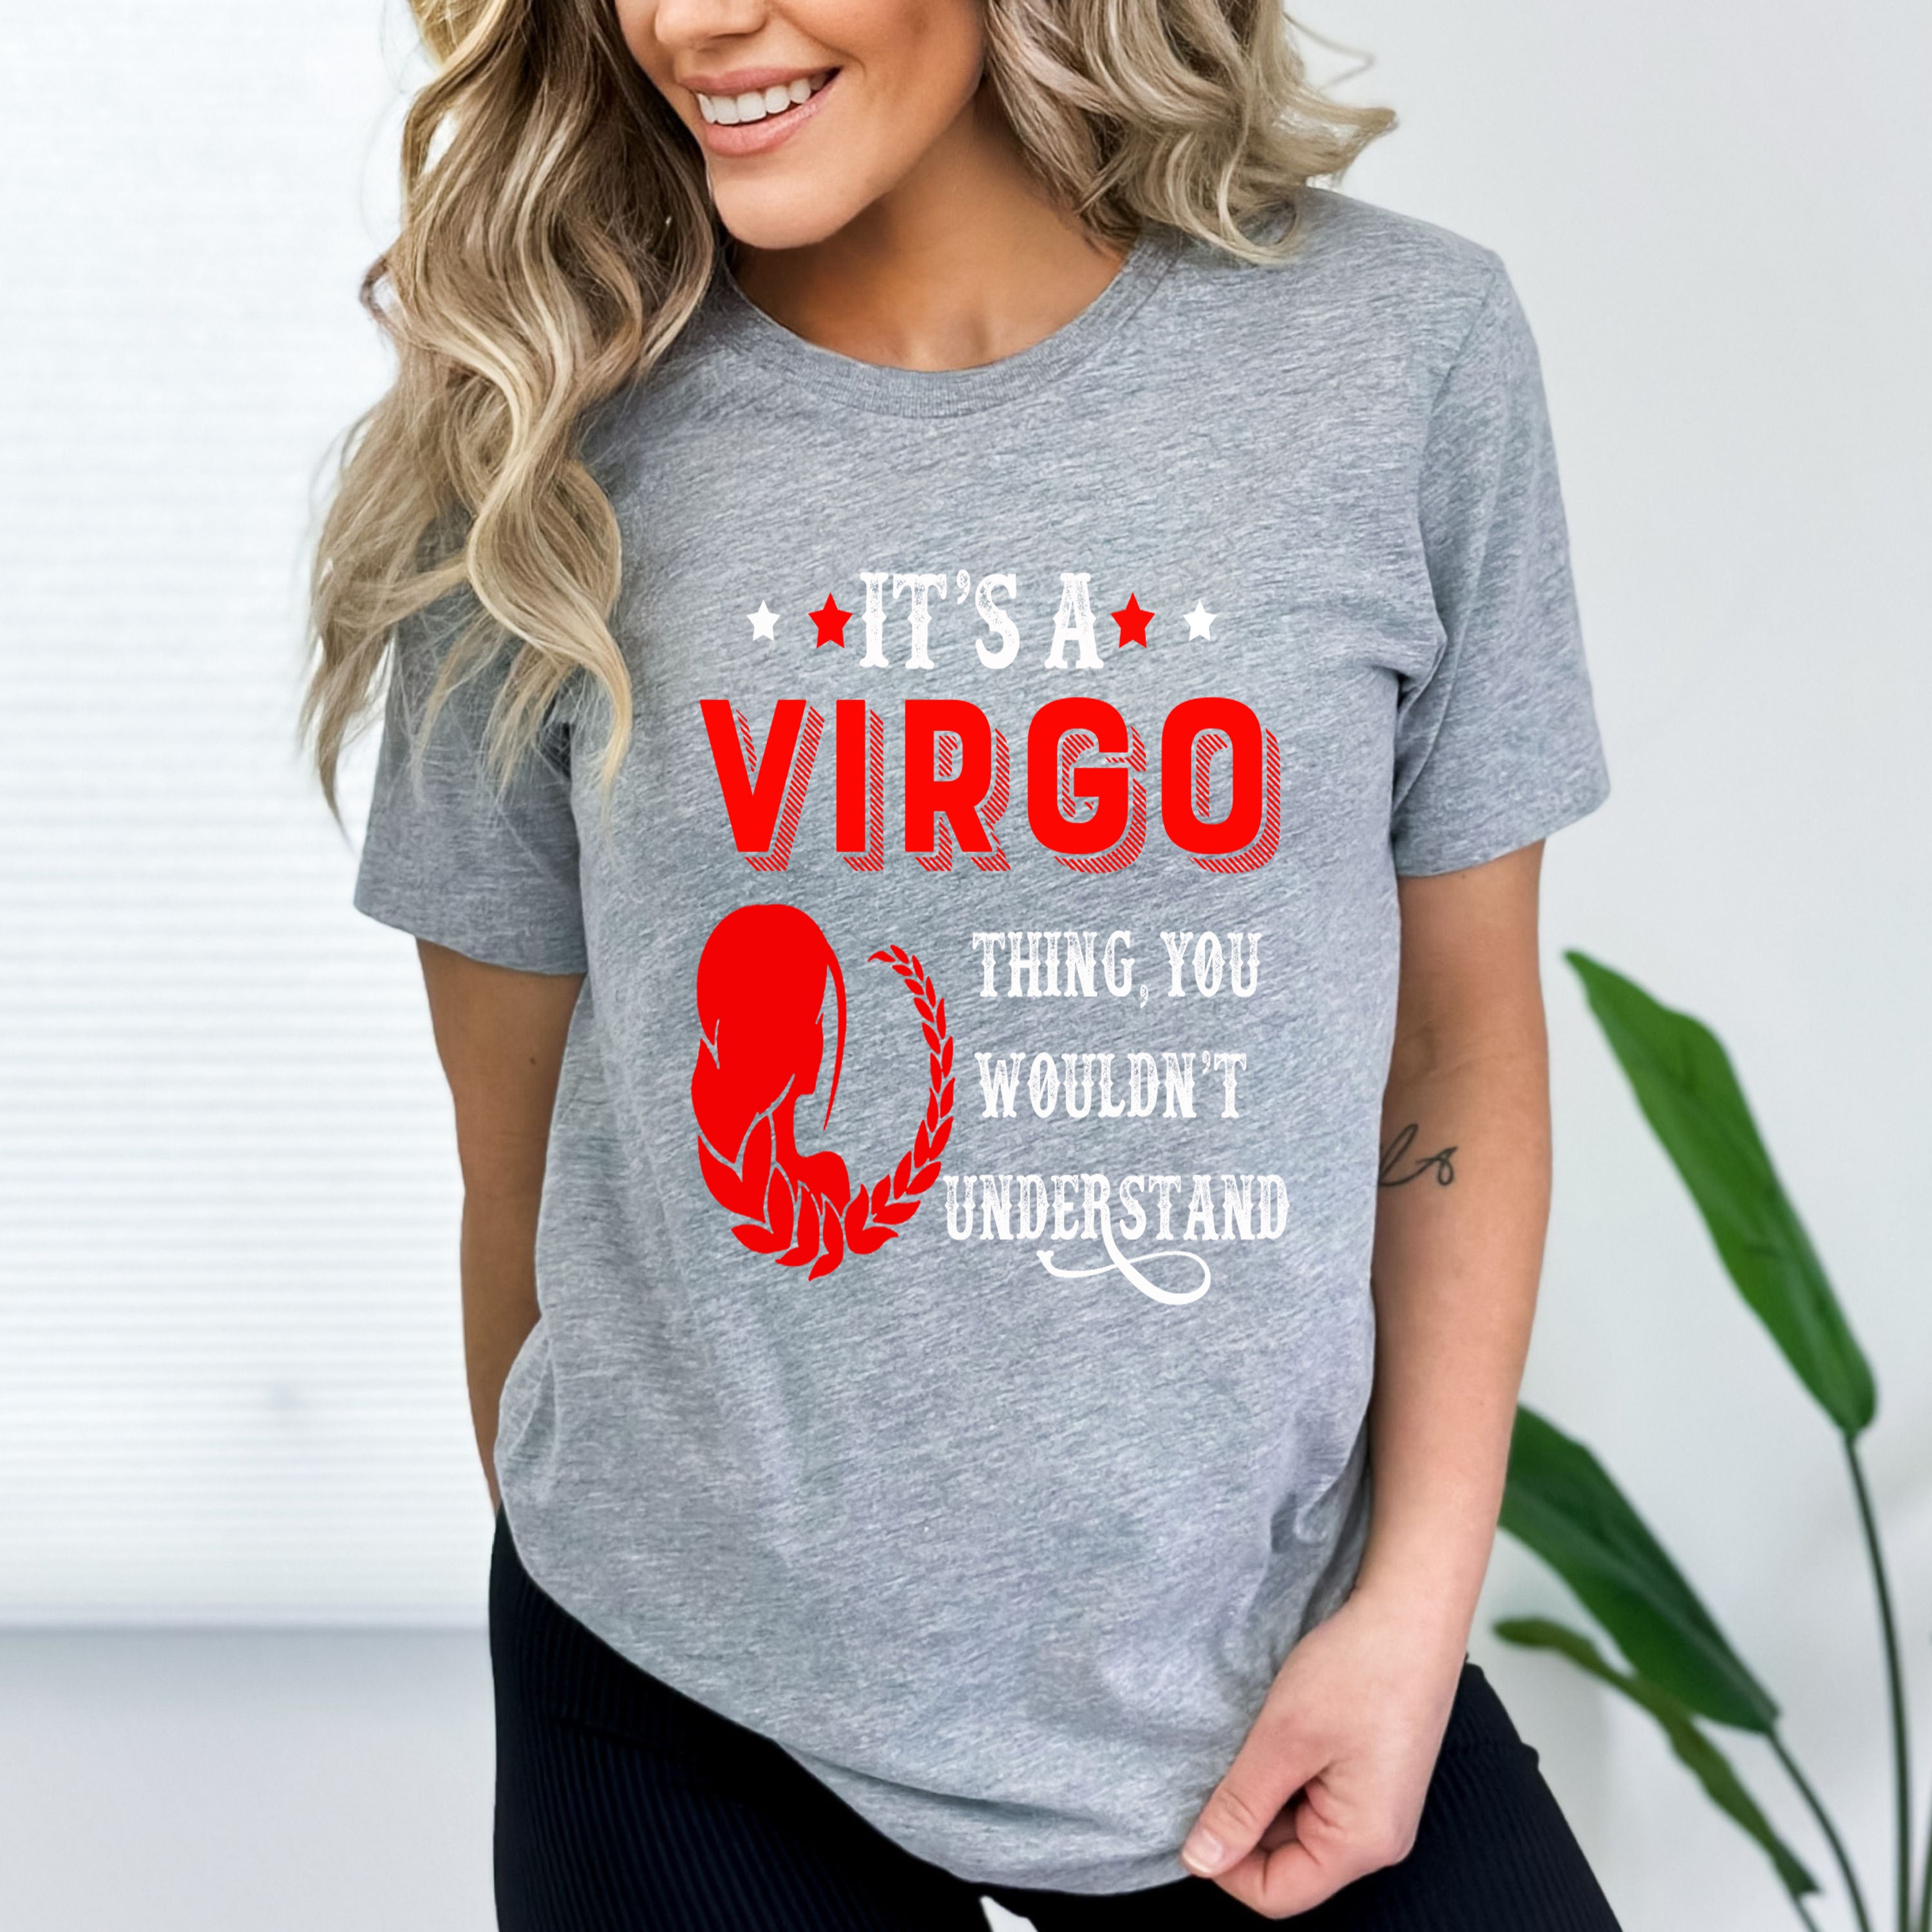 "Its A Virgo Thing, You Wouldn't Understand Zodiac Sign"